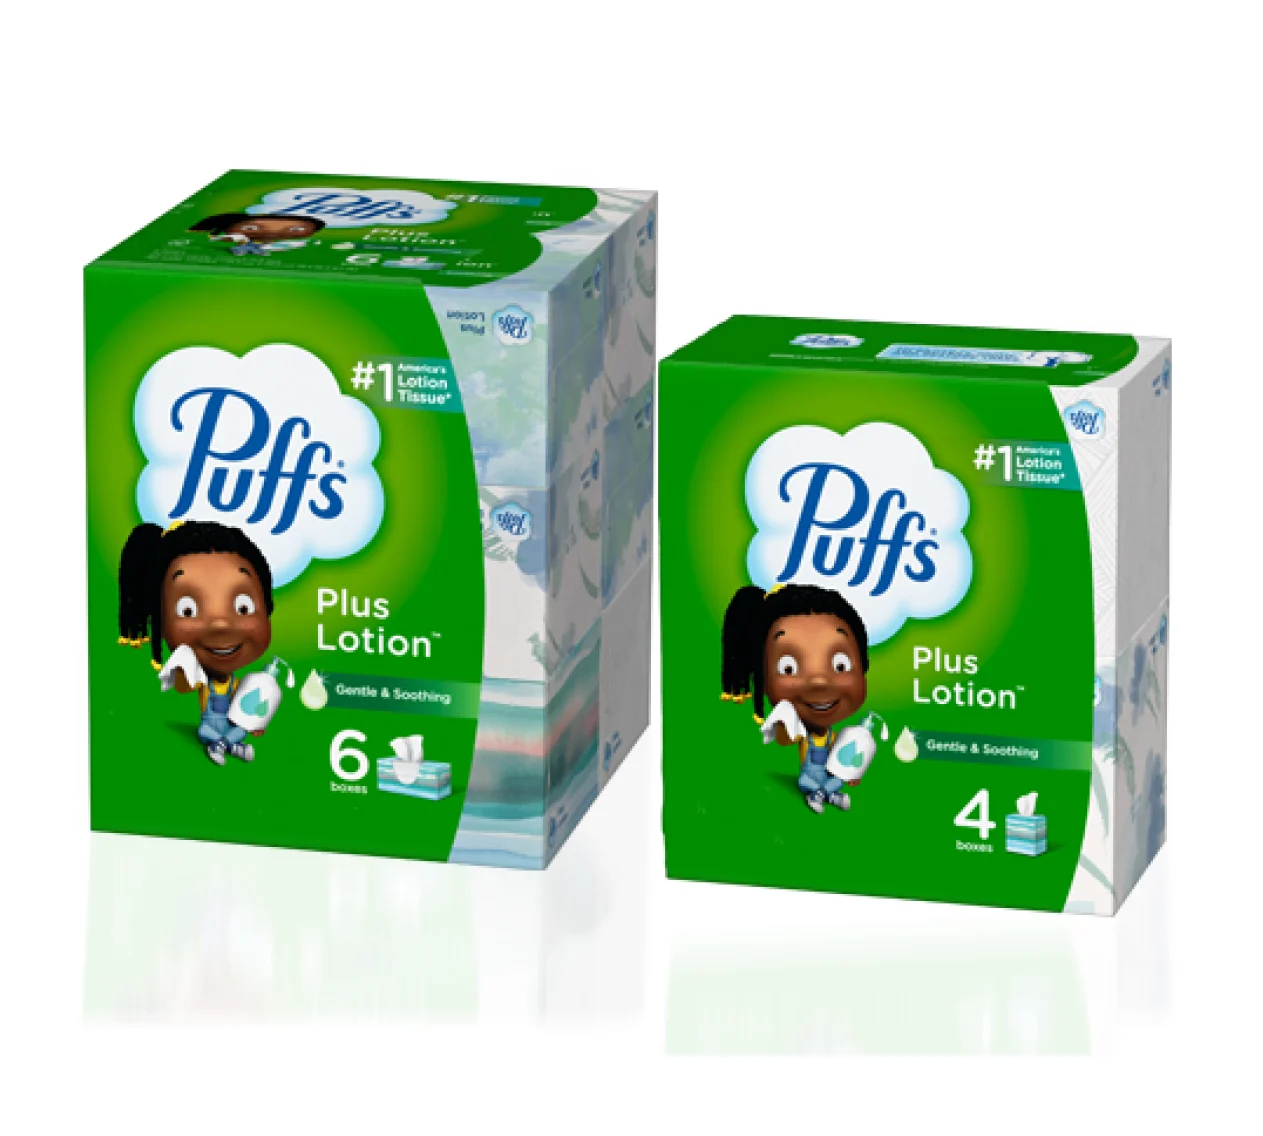 Puffs Plus Lotion multi-packs showing an example of our box designs